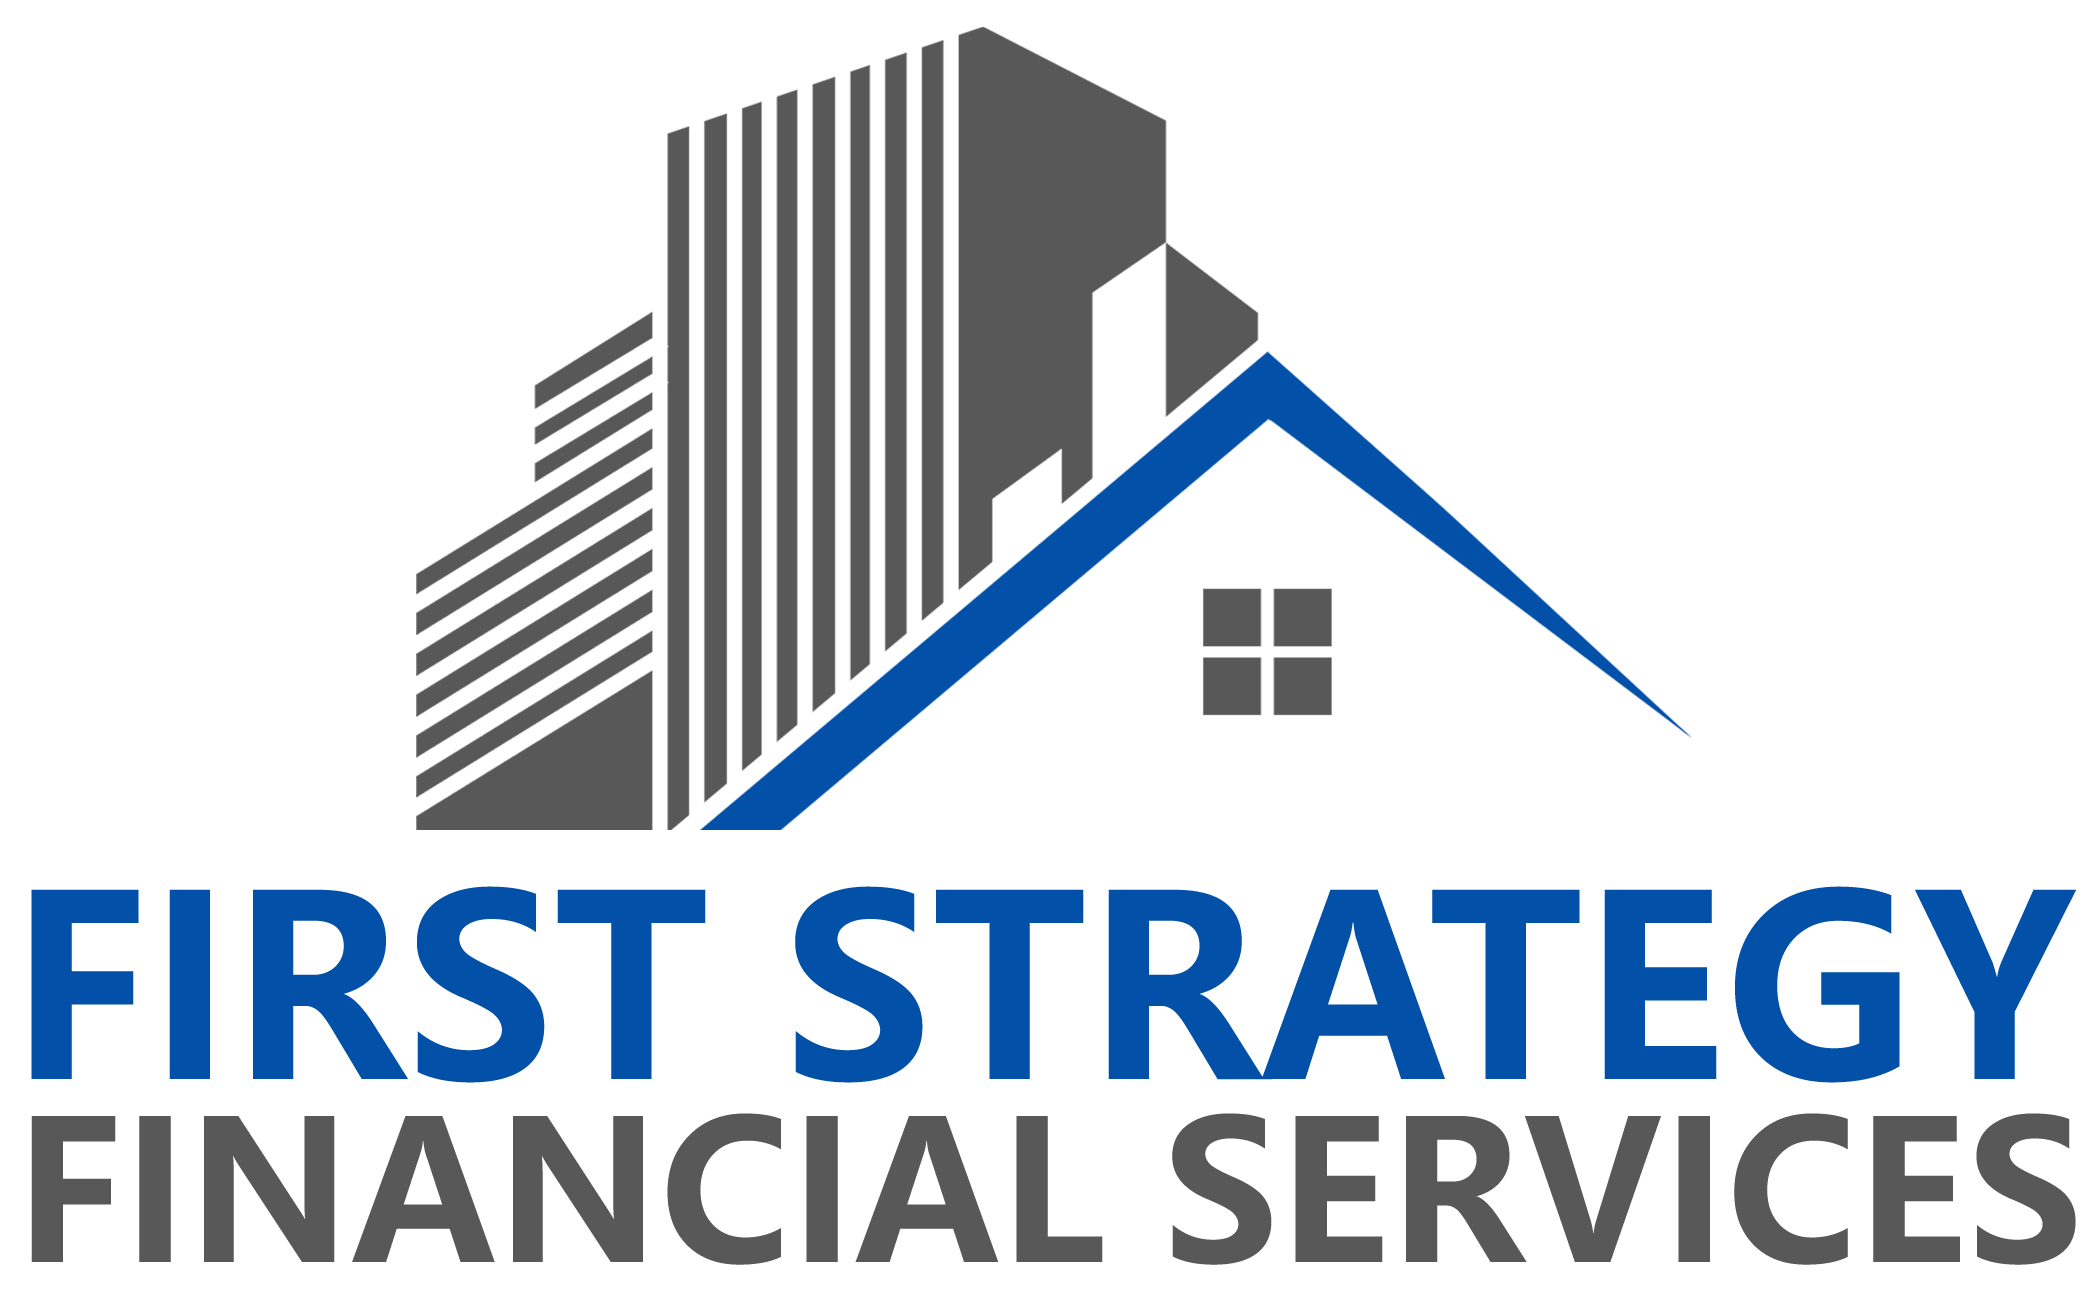 First Strategy Financial Services Ltd